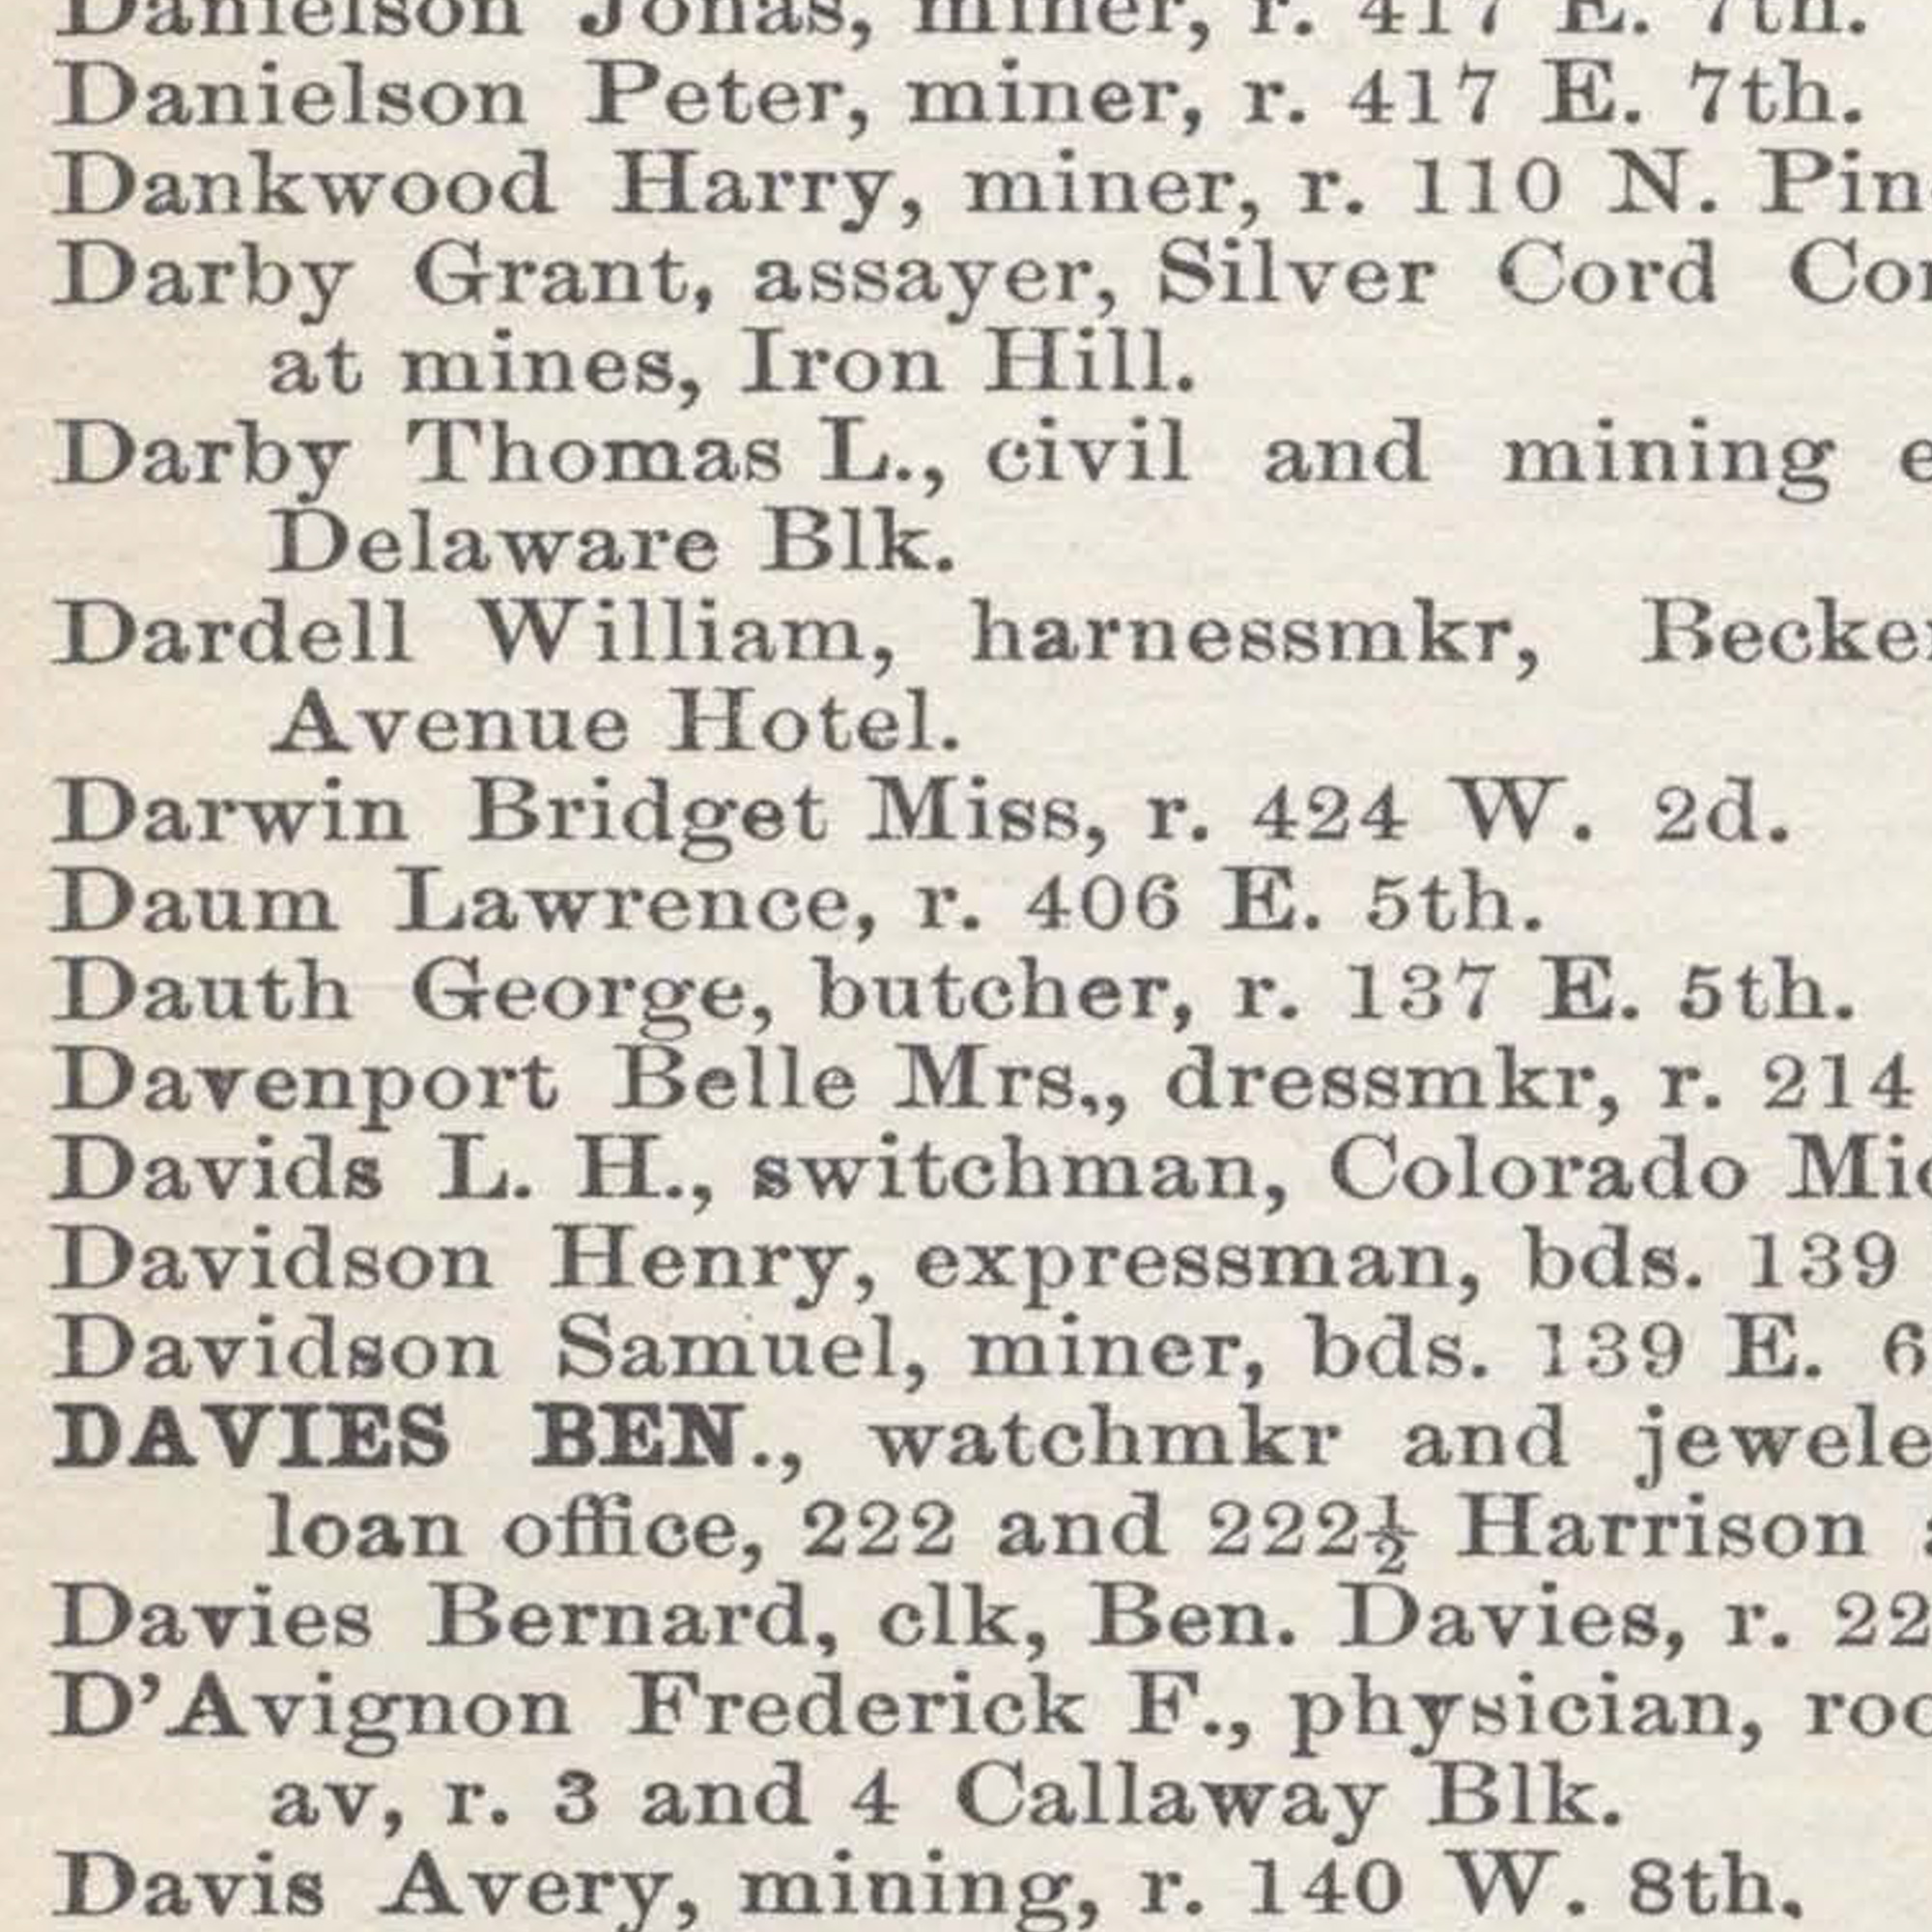 Dauth Family Archive - 1889 - Leadville Directory - Entry for George Dauth